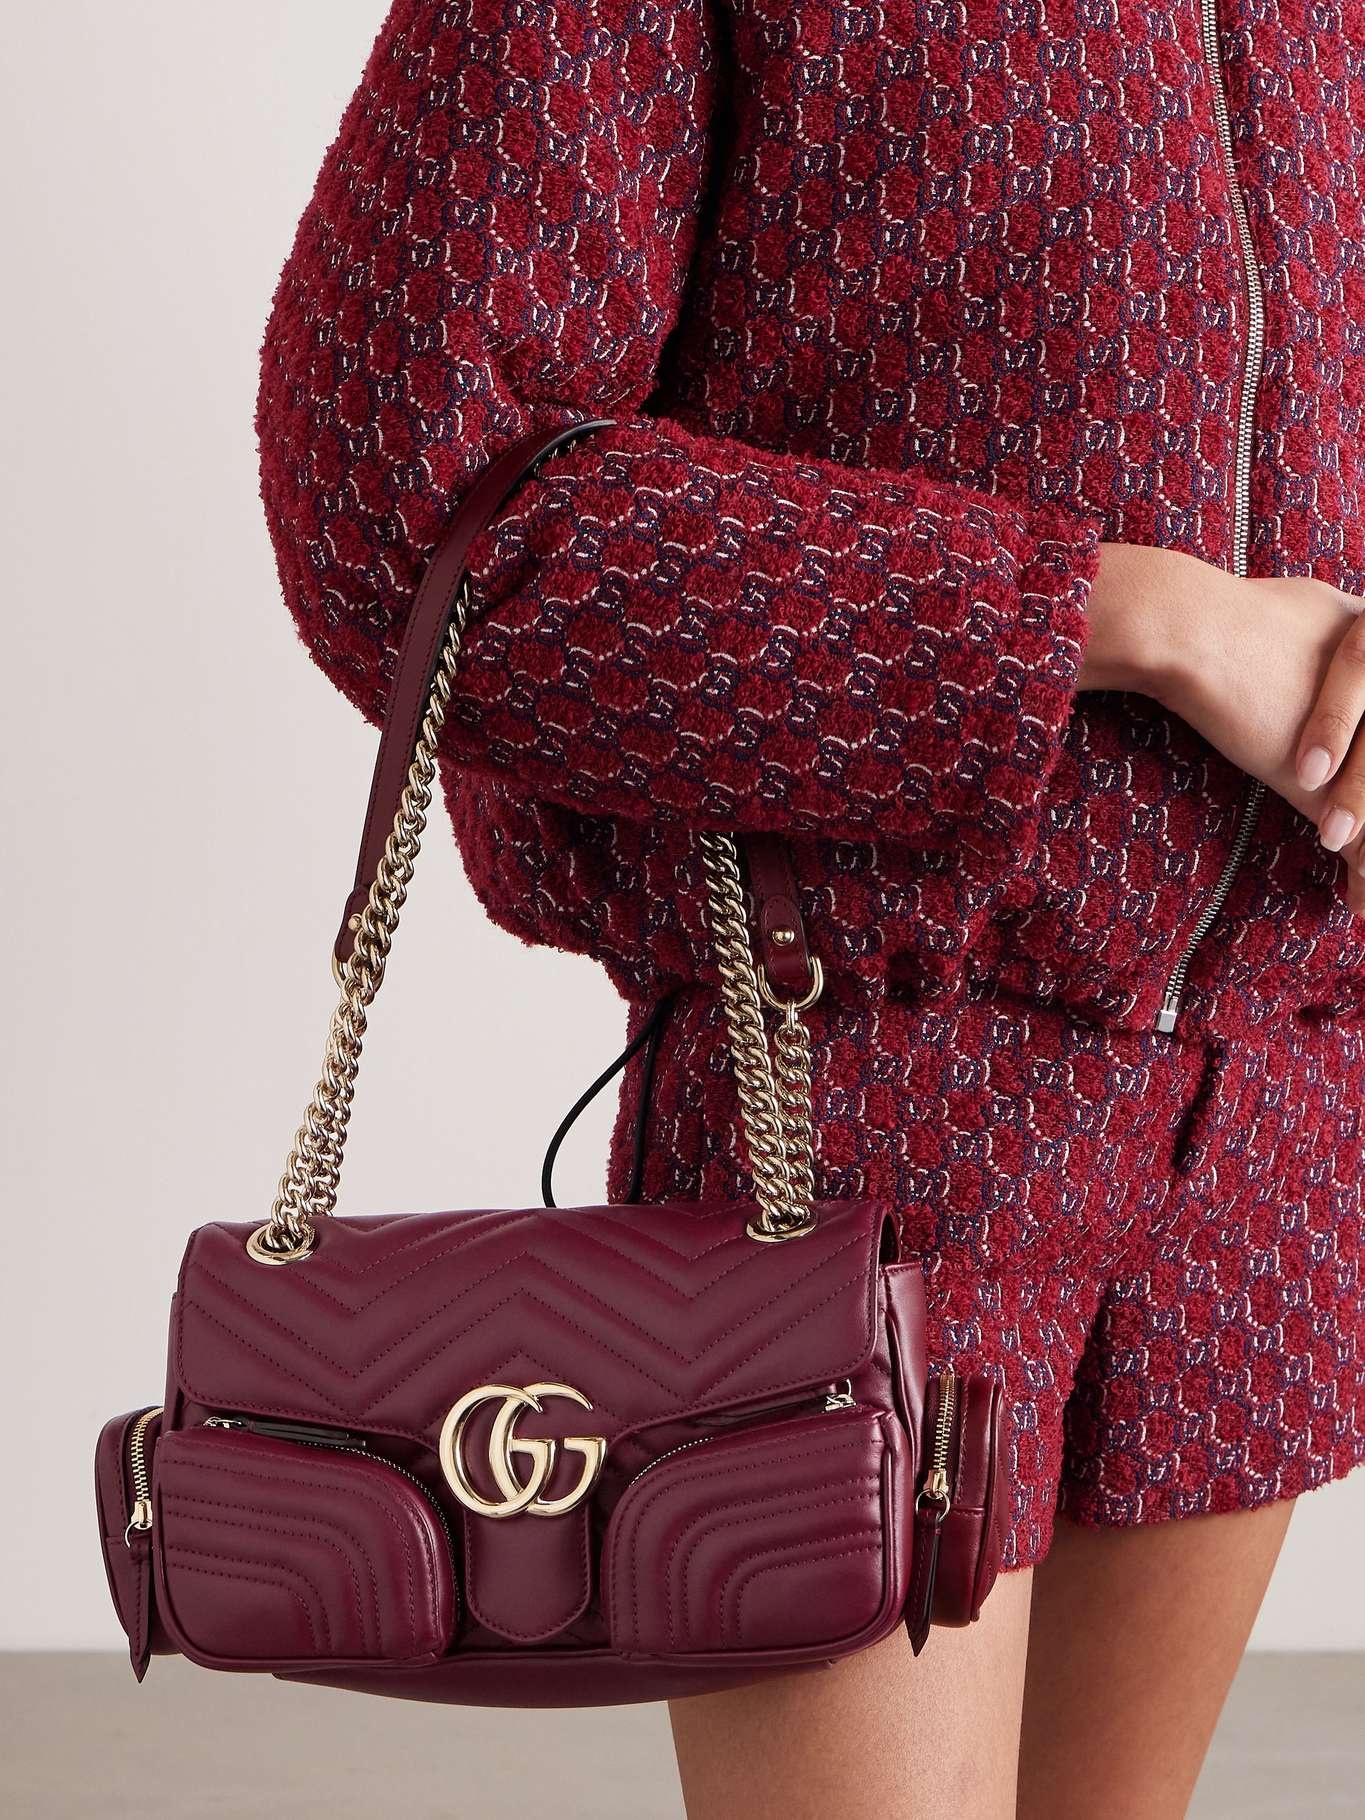 GG Marmont 2.0 quilted leather shoulder bag - 2